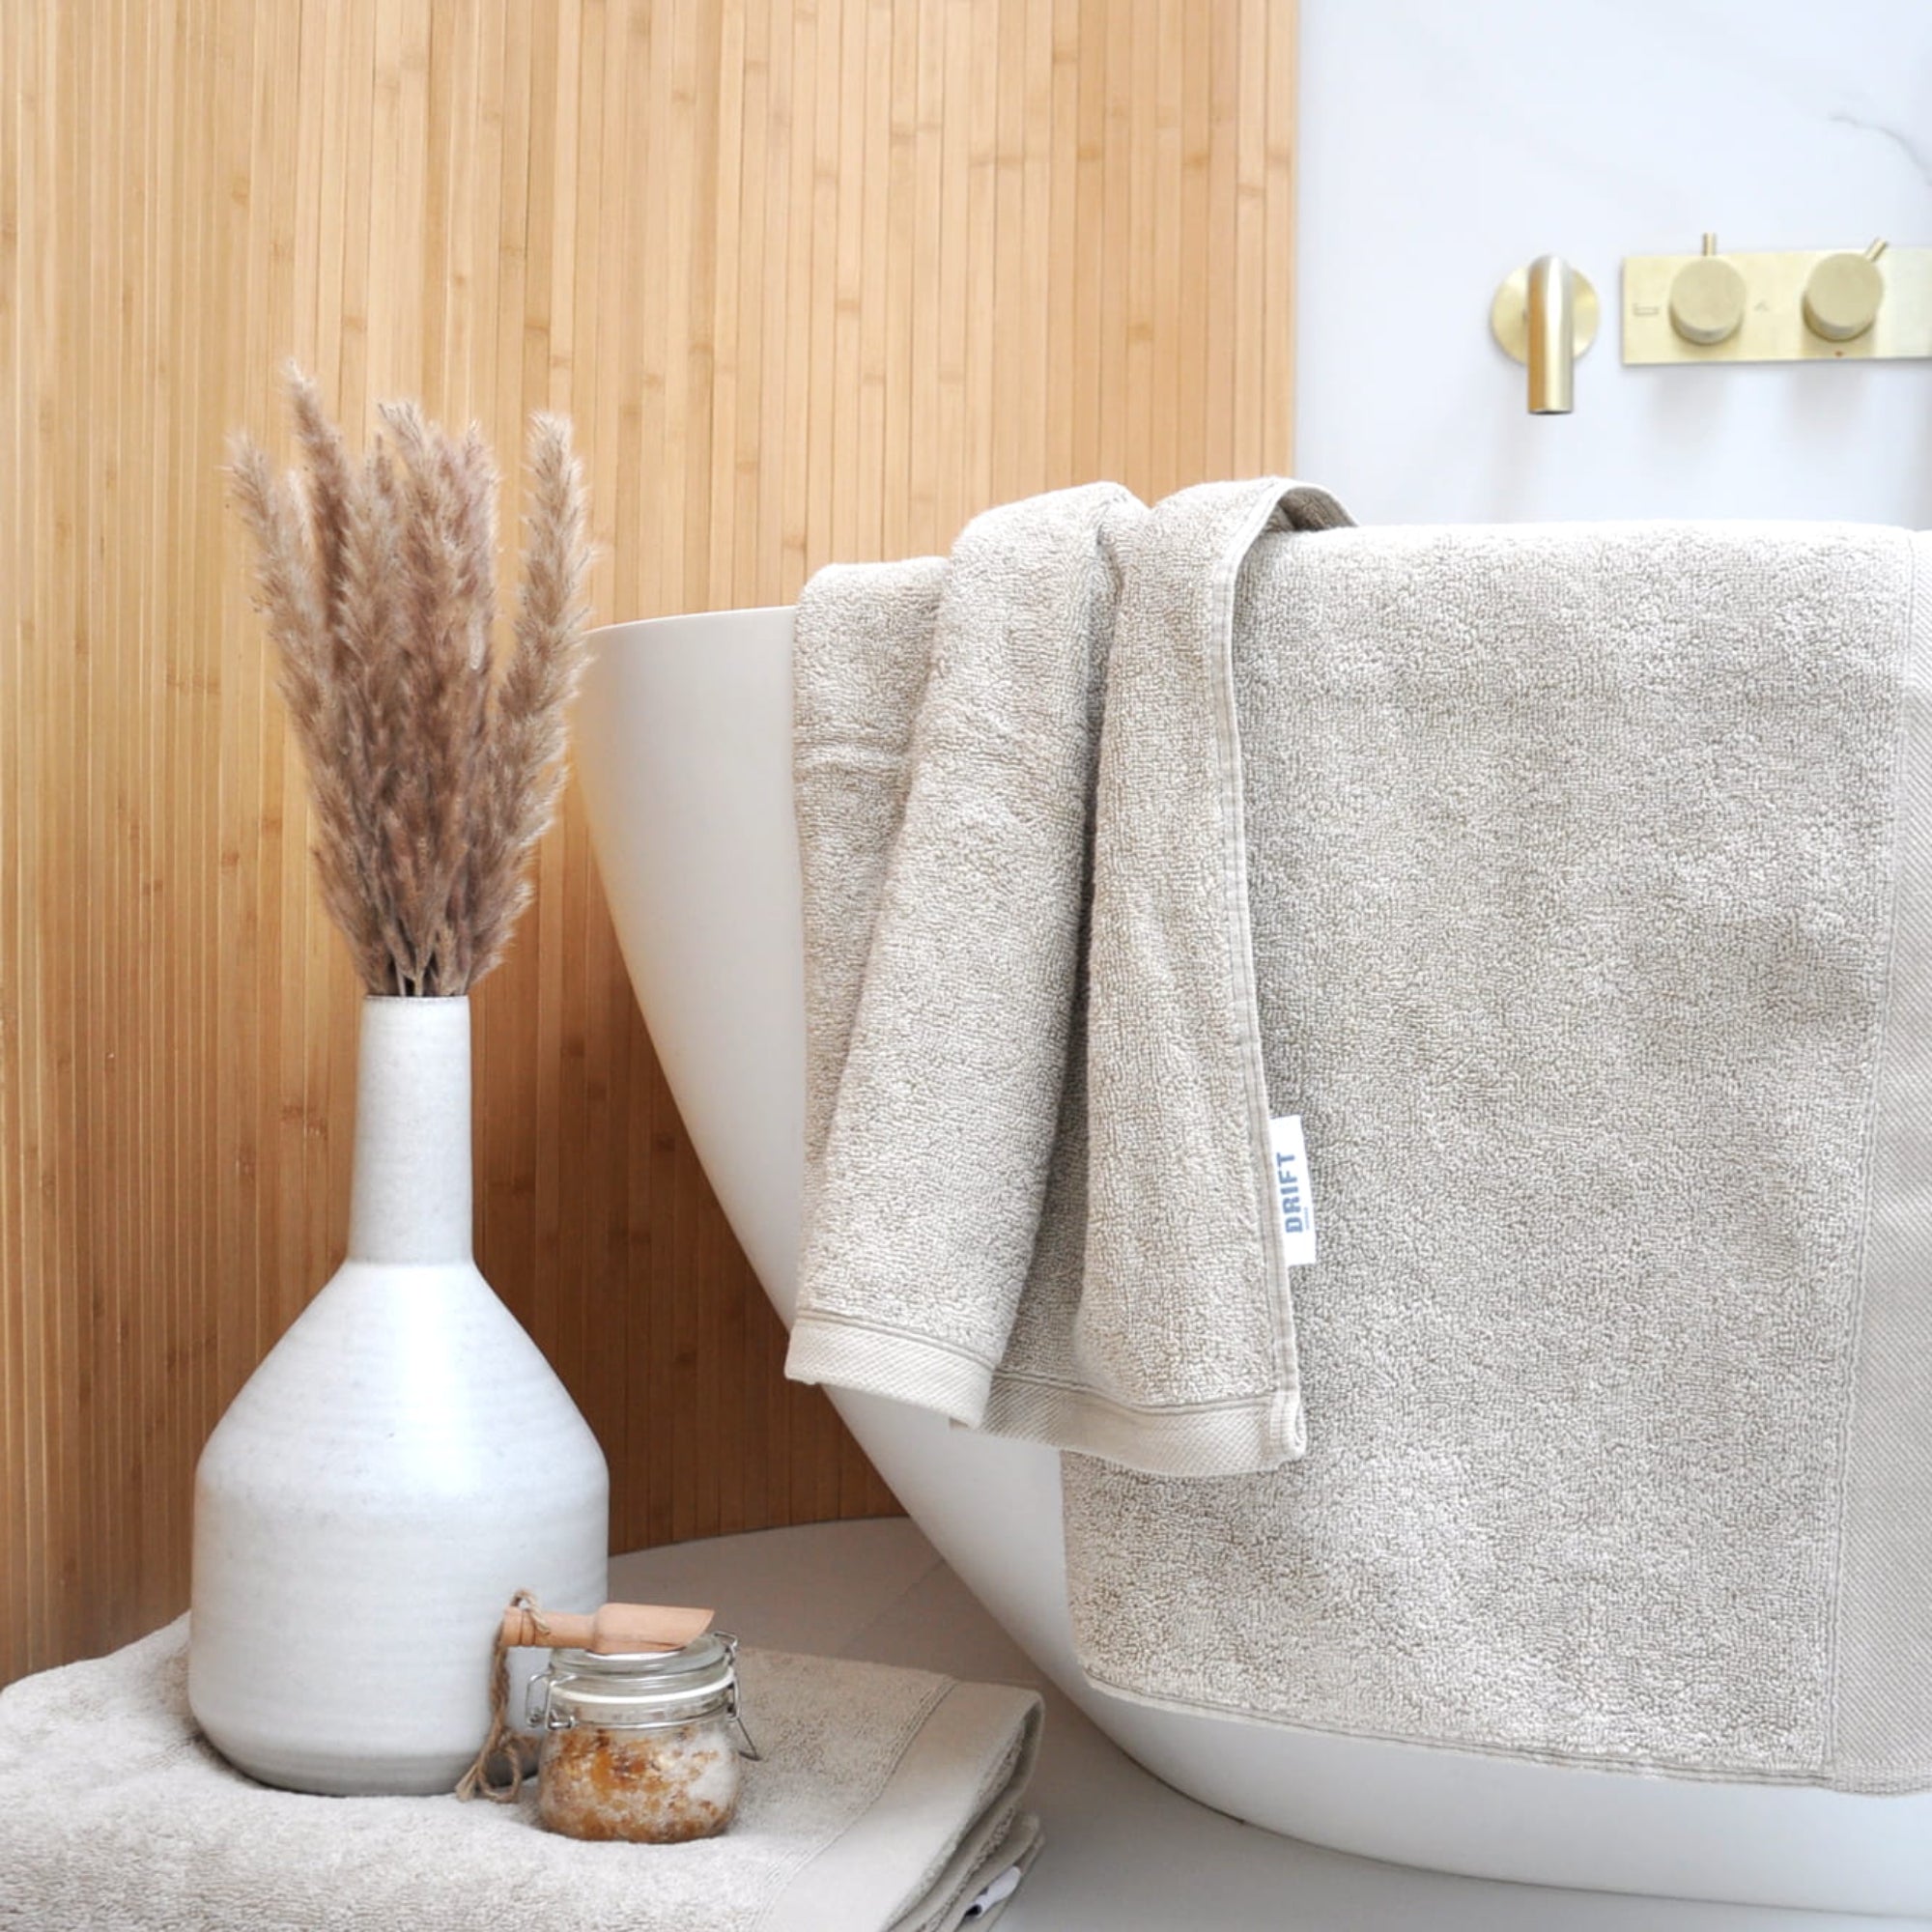 Abode Eco Towels and Bath Sheets by Drift Home in Natural